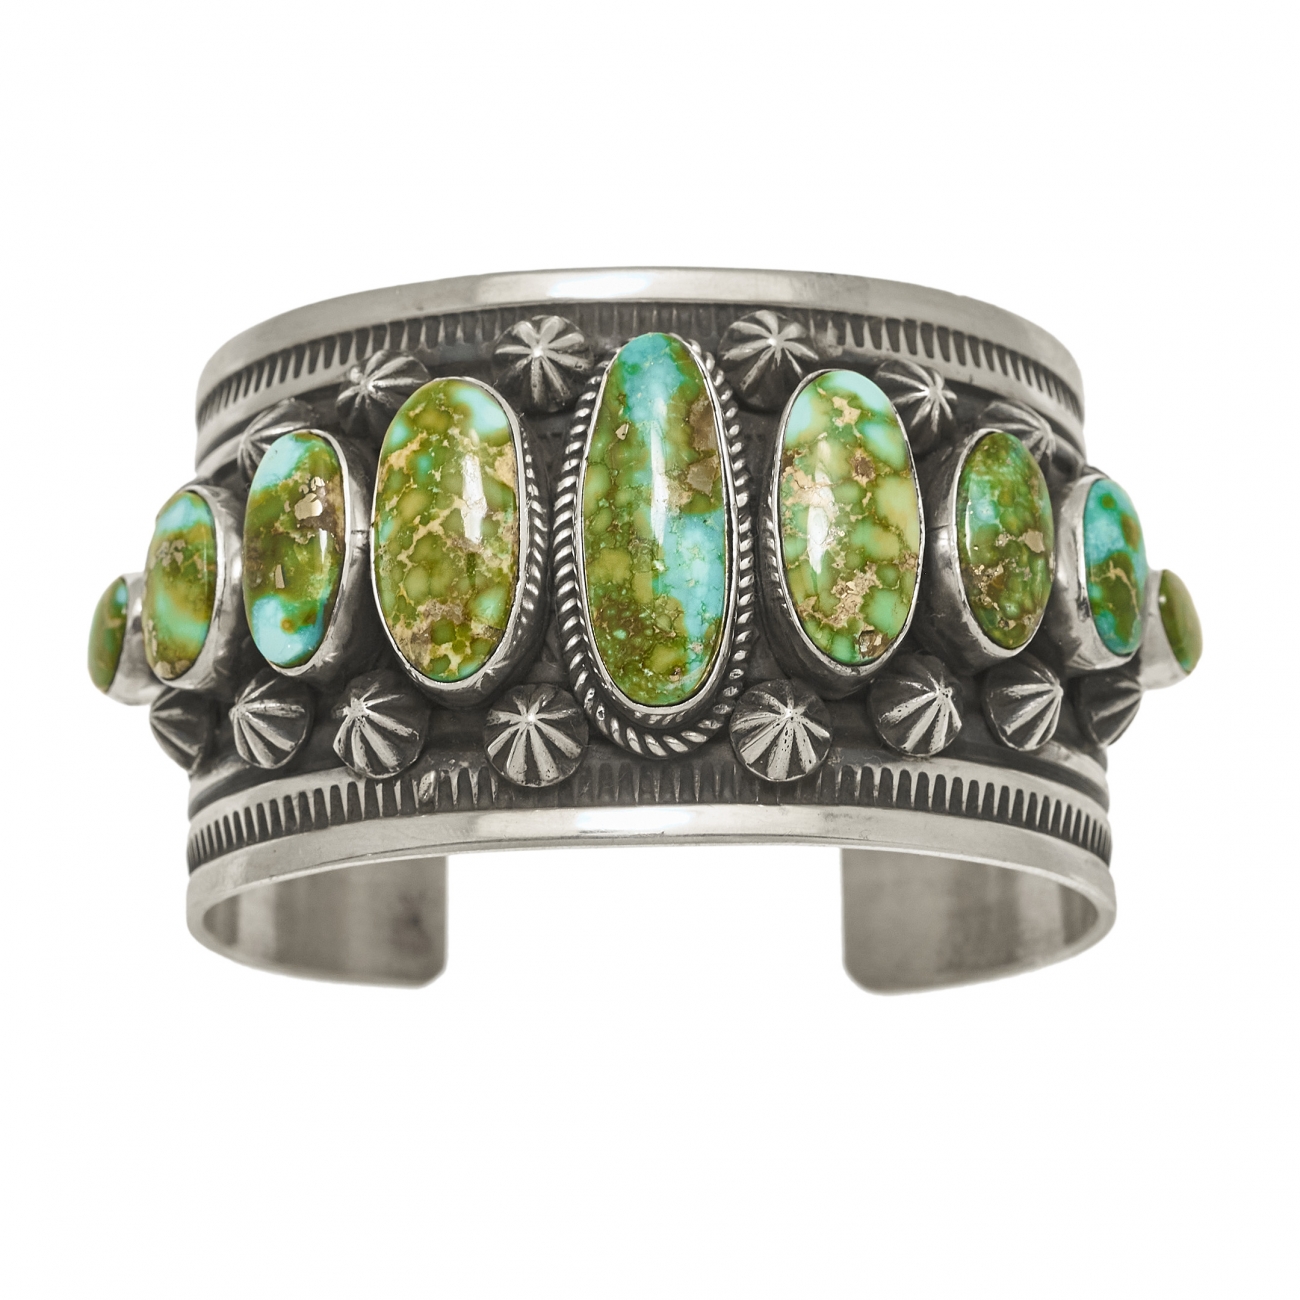 Turquoise and silver cuff bracelet BR789 - Harpo Paris